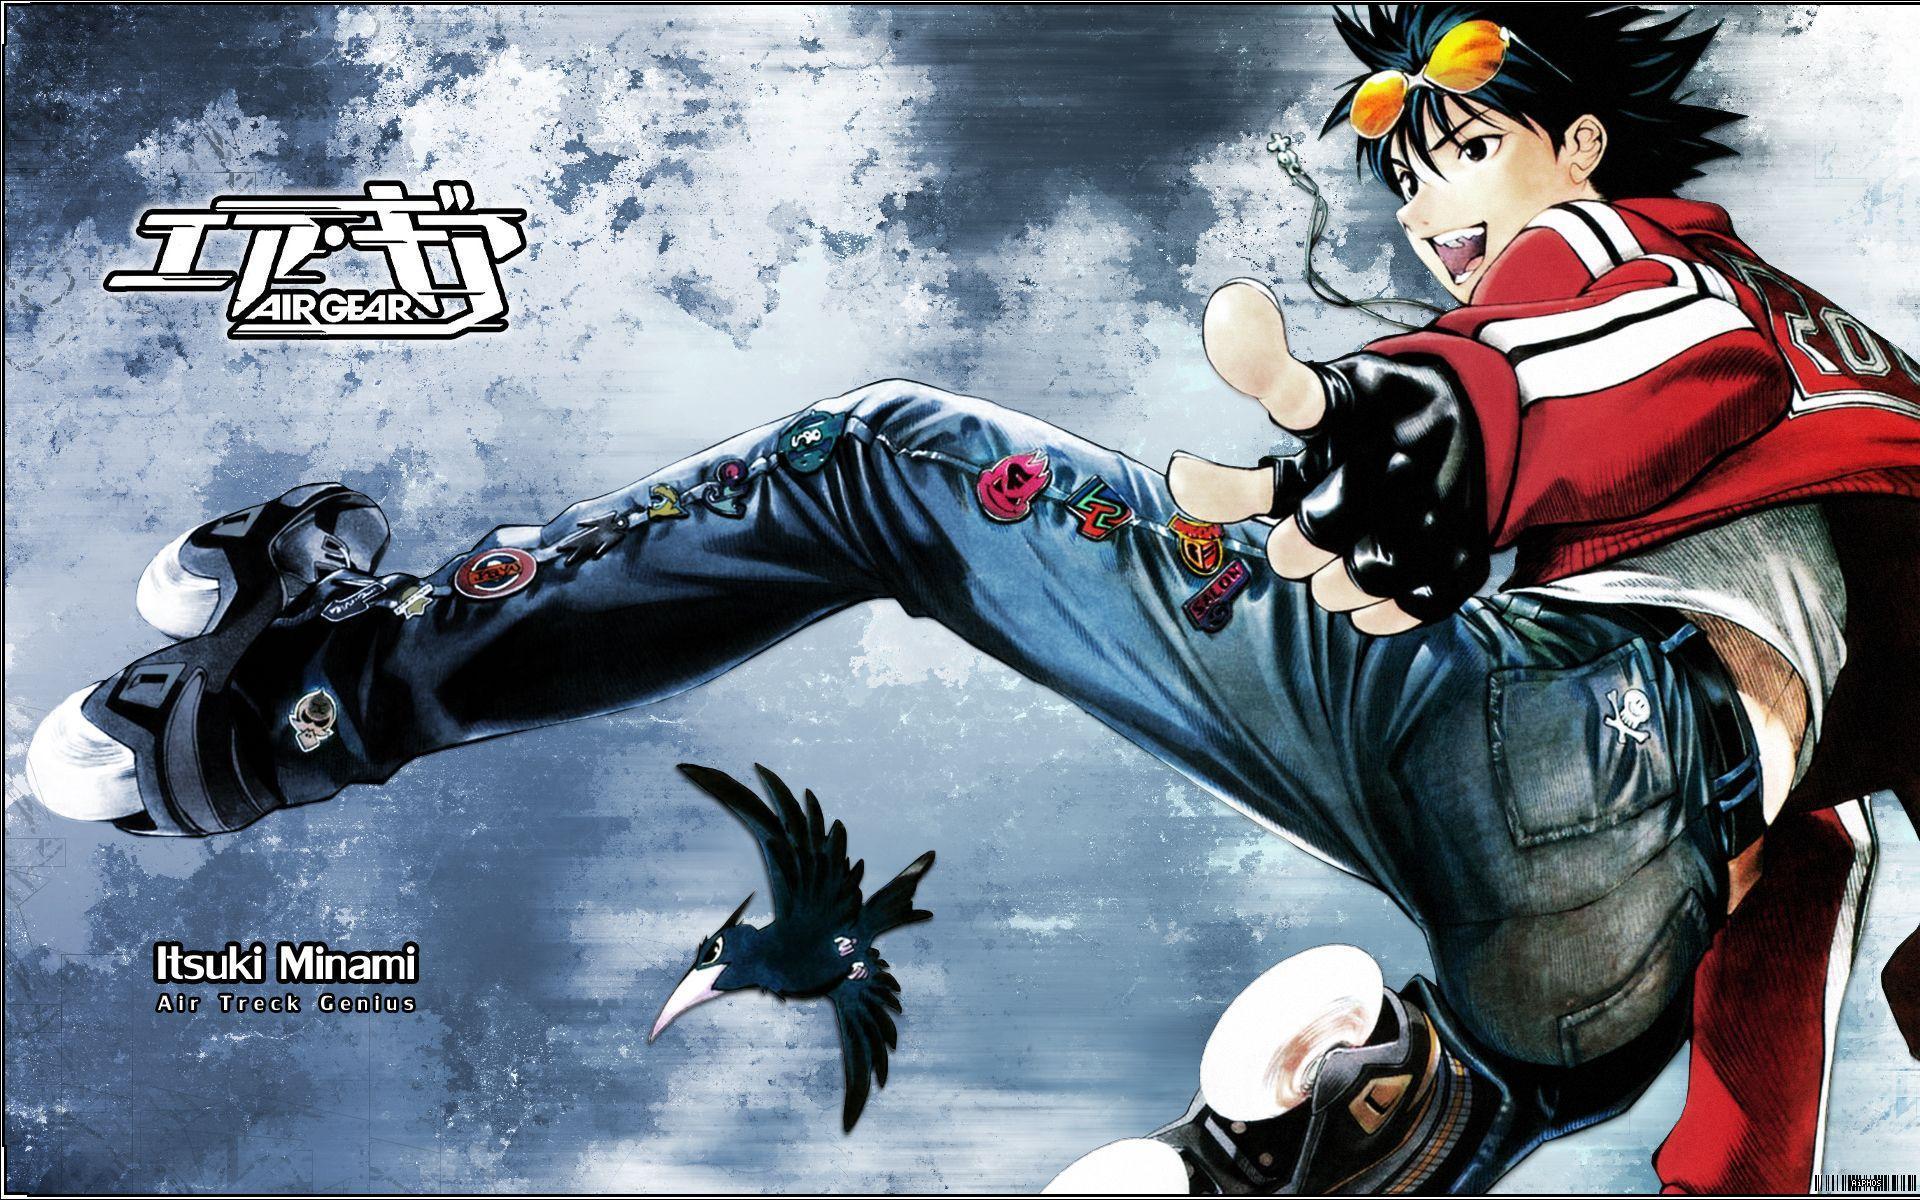 Air Gear Wallpapers Wallpaper Cave Images, Photos, Reviews